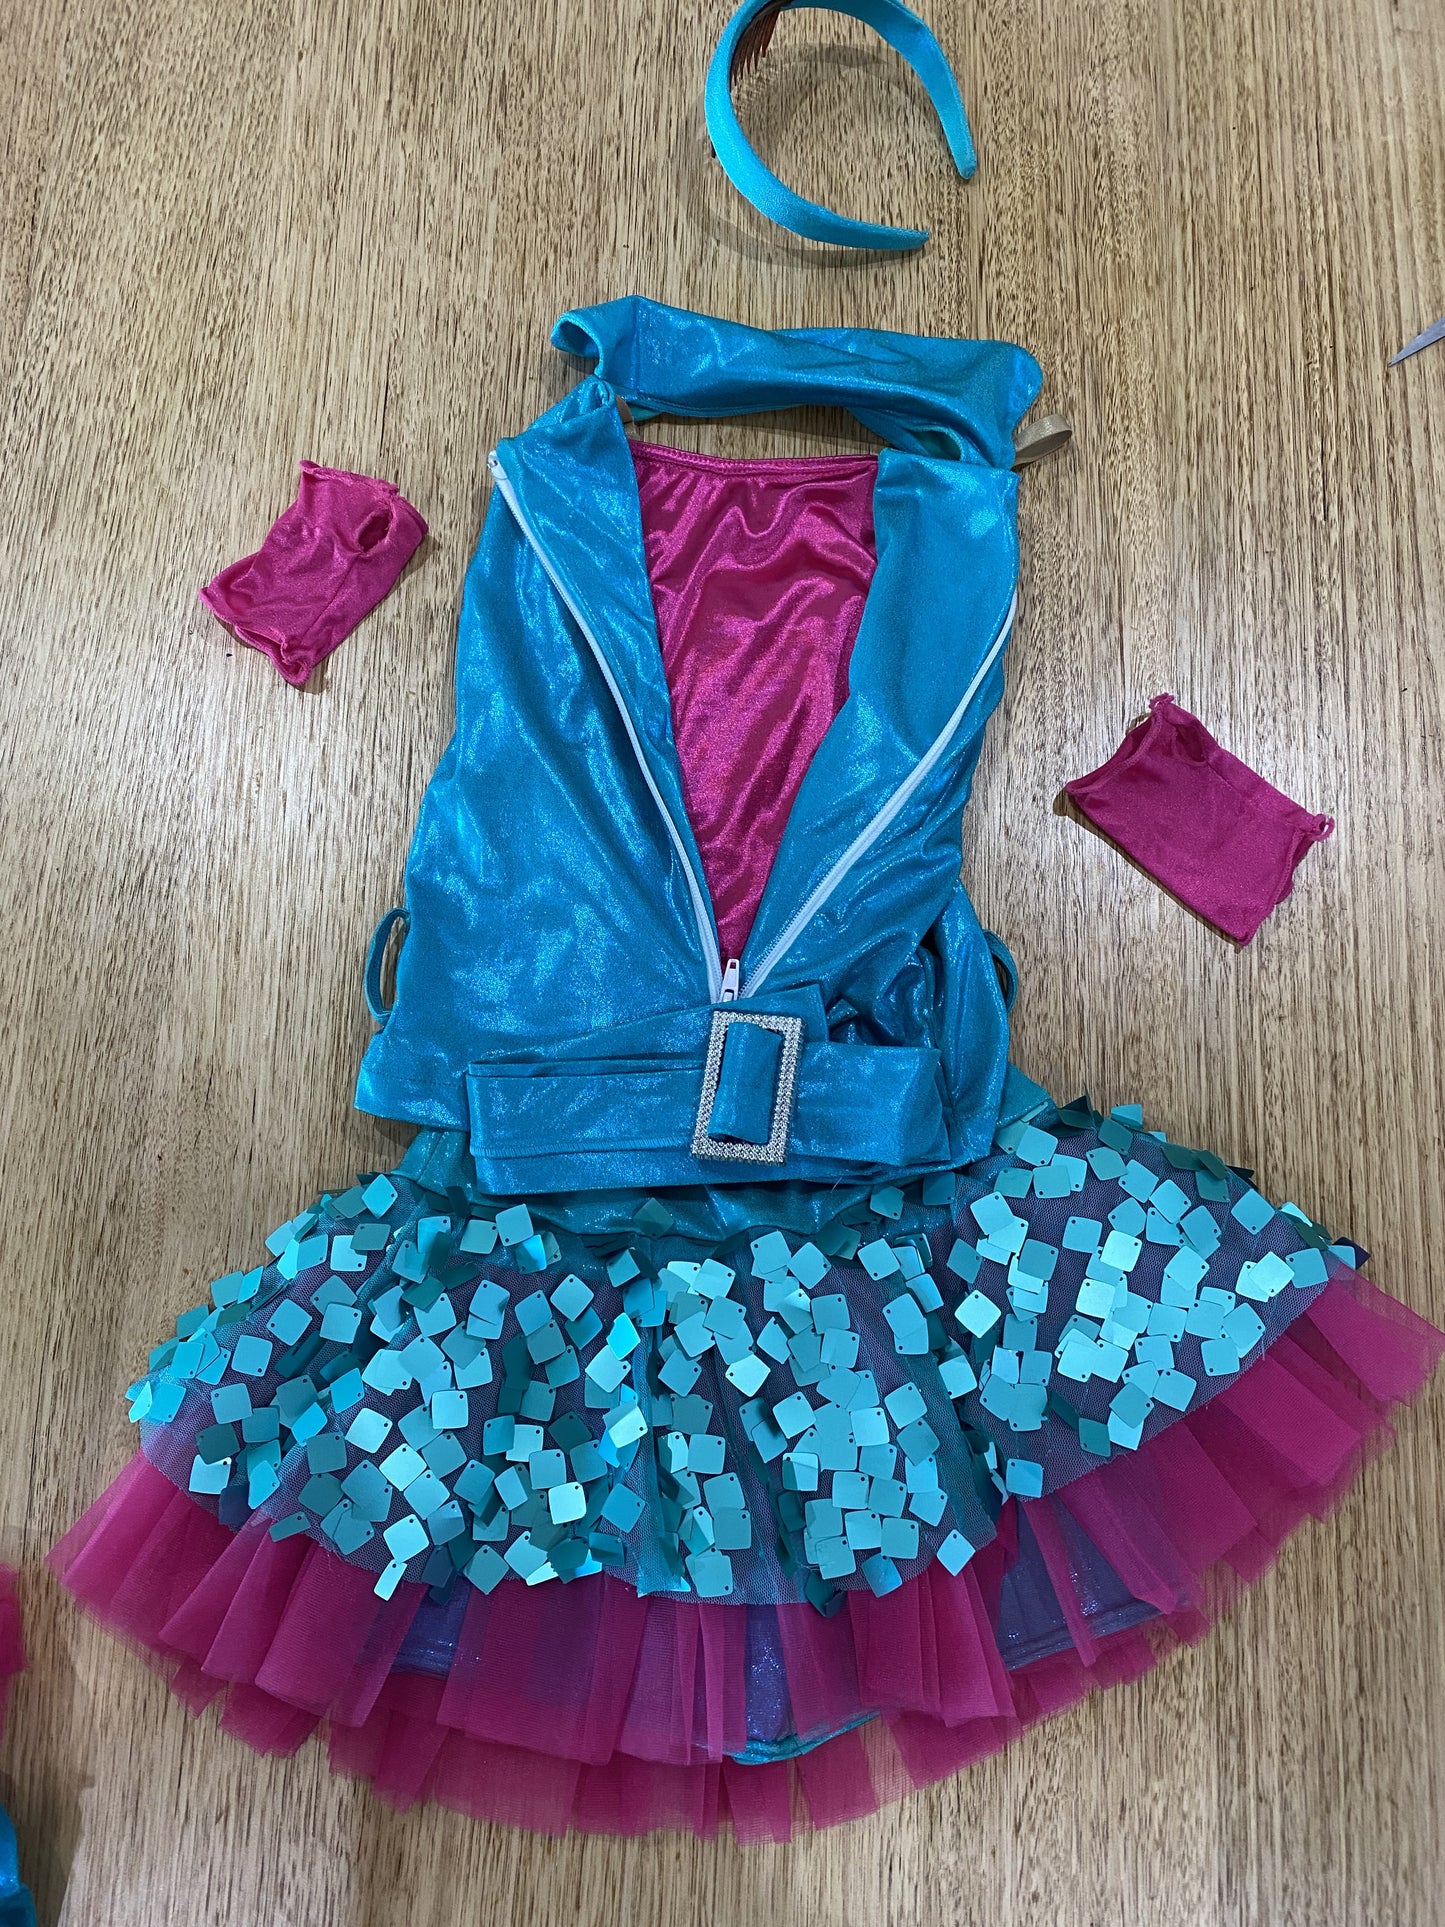 A 32128 turquoise sequins skirt and outfit to razzle - med child